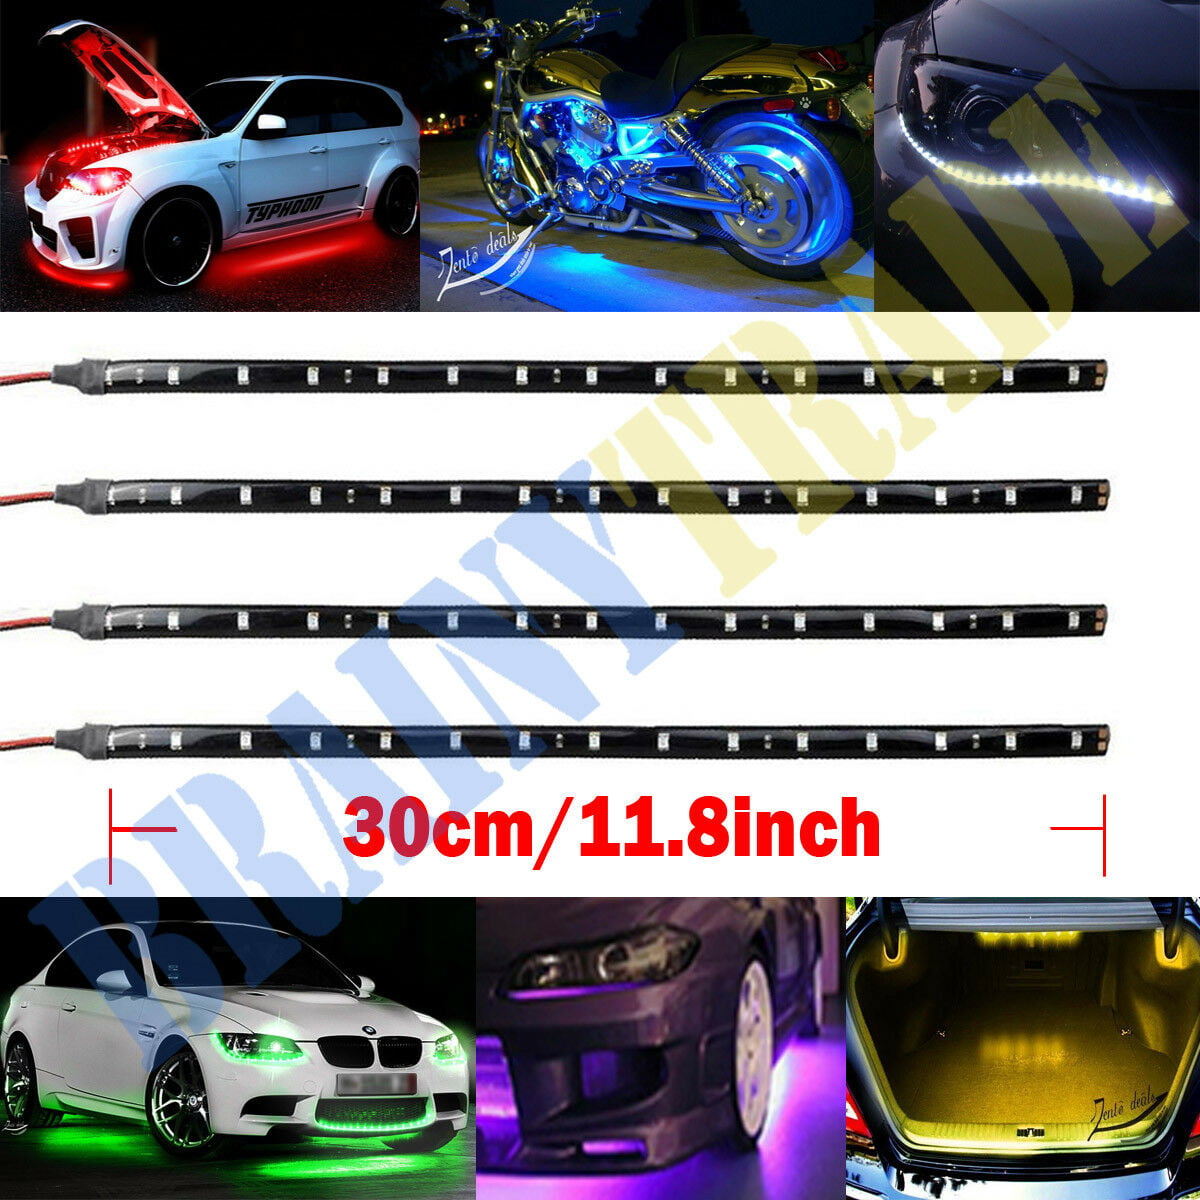 6 Pack  DC 12V Waterproof 1Ft 15 LED Strip Underbody Light with 6" wires 4 motor